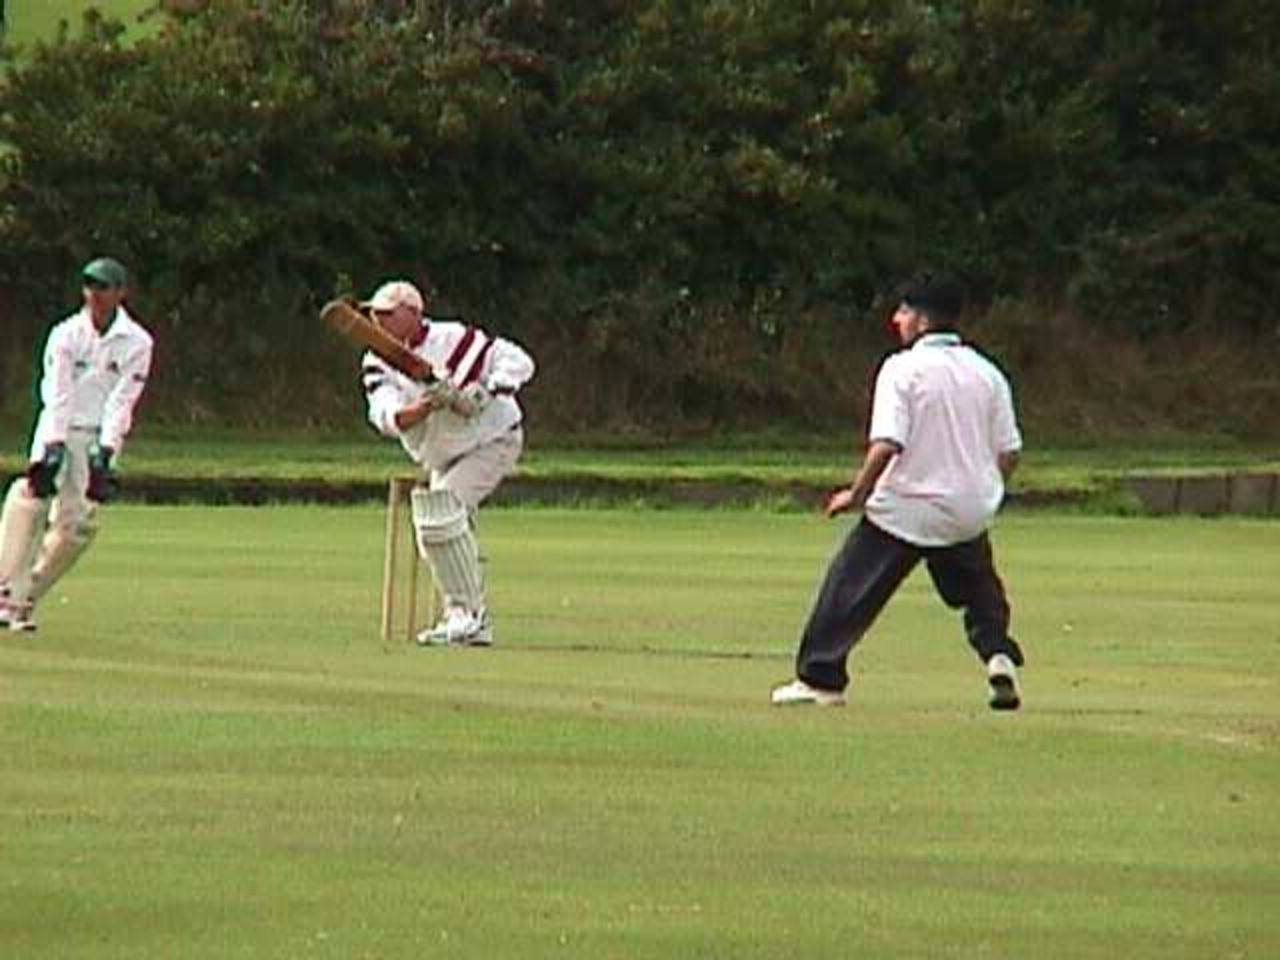 In a photograph reminiscent of a vintage 1981 snap taken in a record breaking season, Accrington coach Graham Beech shows he can still remember how to play the classic cover drive off Zafar Aslam